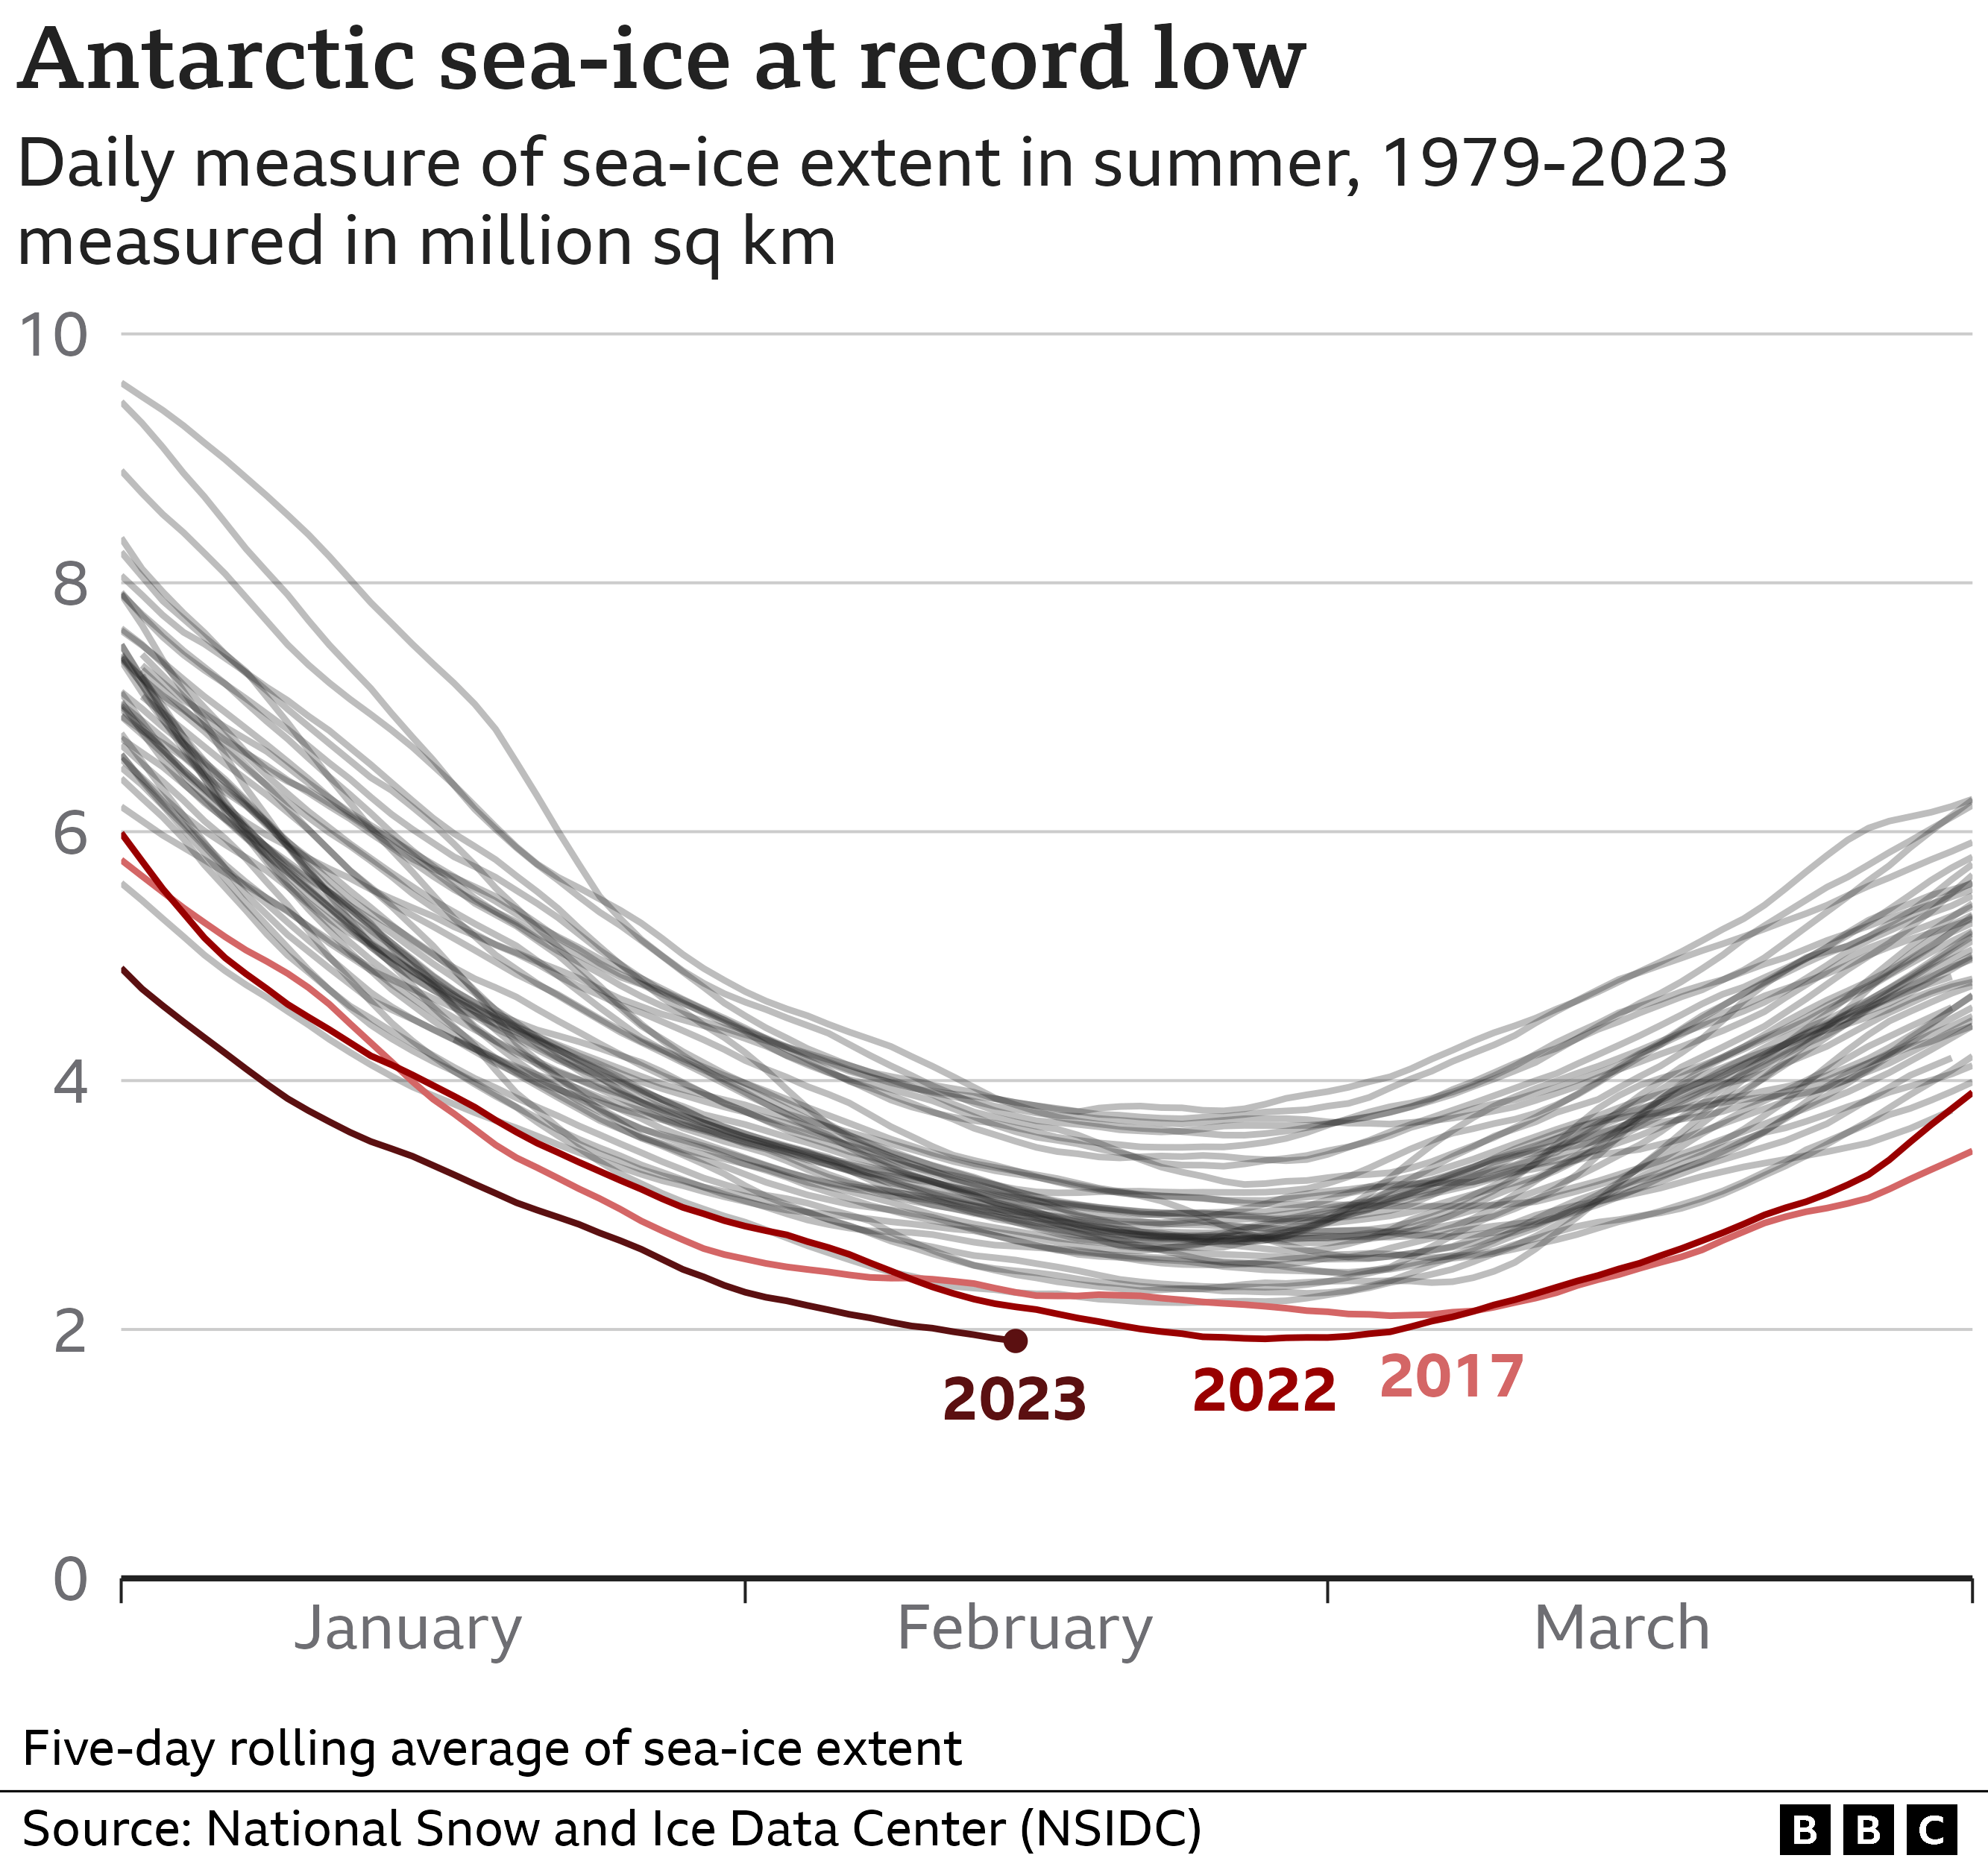 Line chart showing the rolling 5-day average measure of sea-ice extent in Antarctica with one line per year since 1979. The three most recent years have been highlighted: in 2017 a record was set in early March; this was broken in February 2022 and again in February 2023